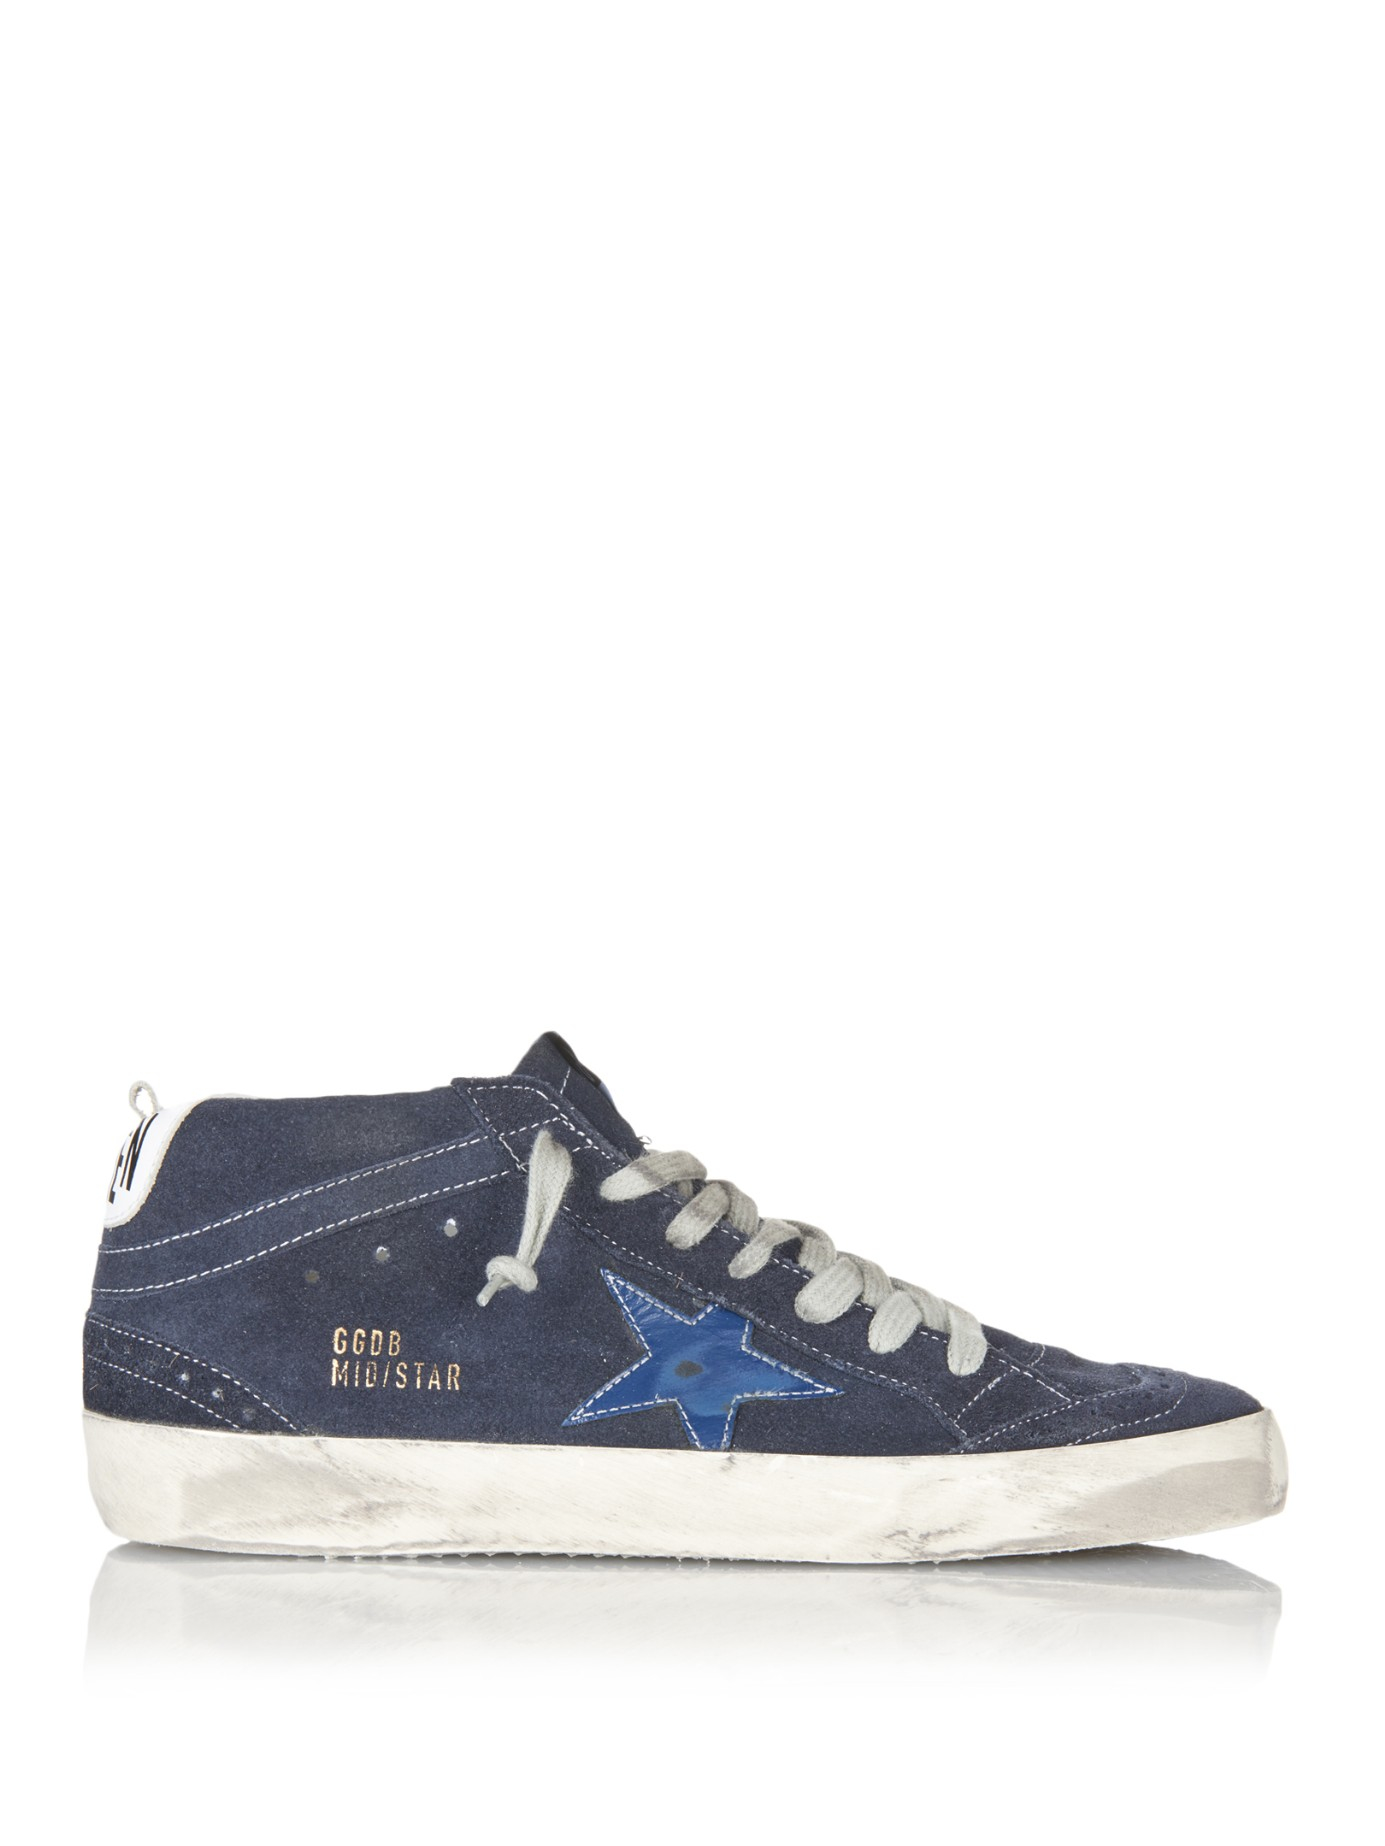 Golden Goose Deluxe Brand Mid Star Distressed-Suede Sneakers in Blue - Lyst